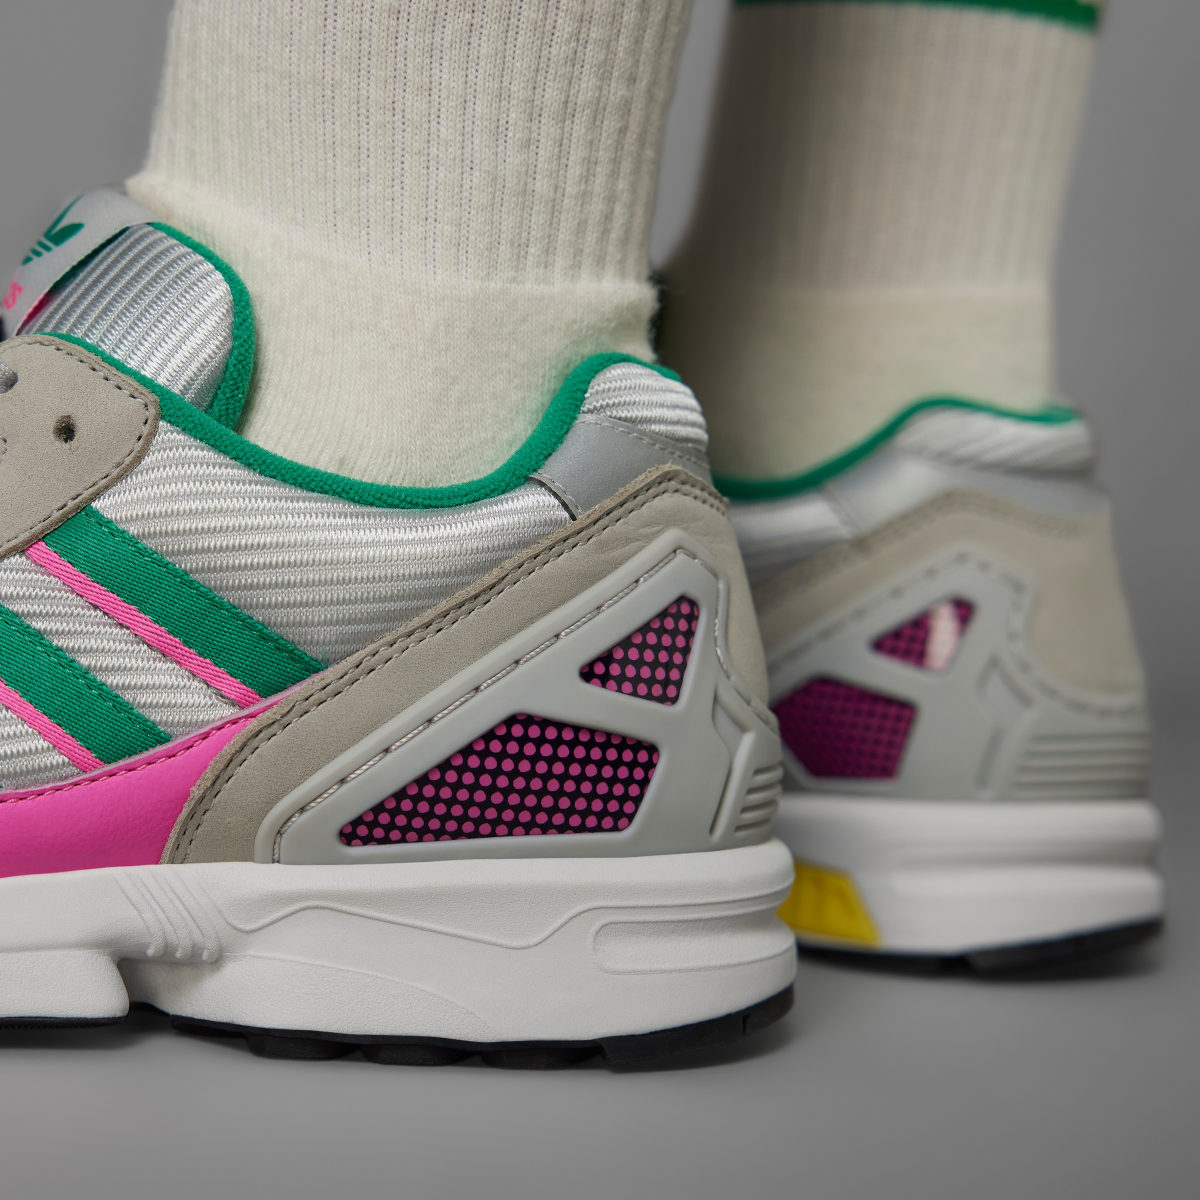 Adidas ZX 8000 Shoes. 11